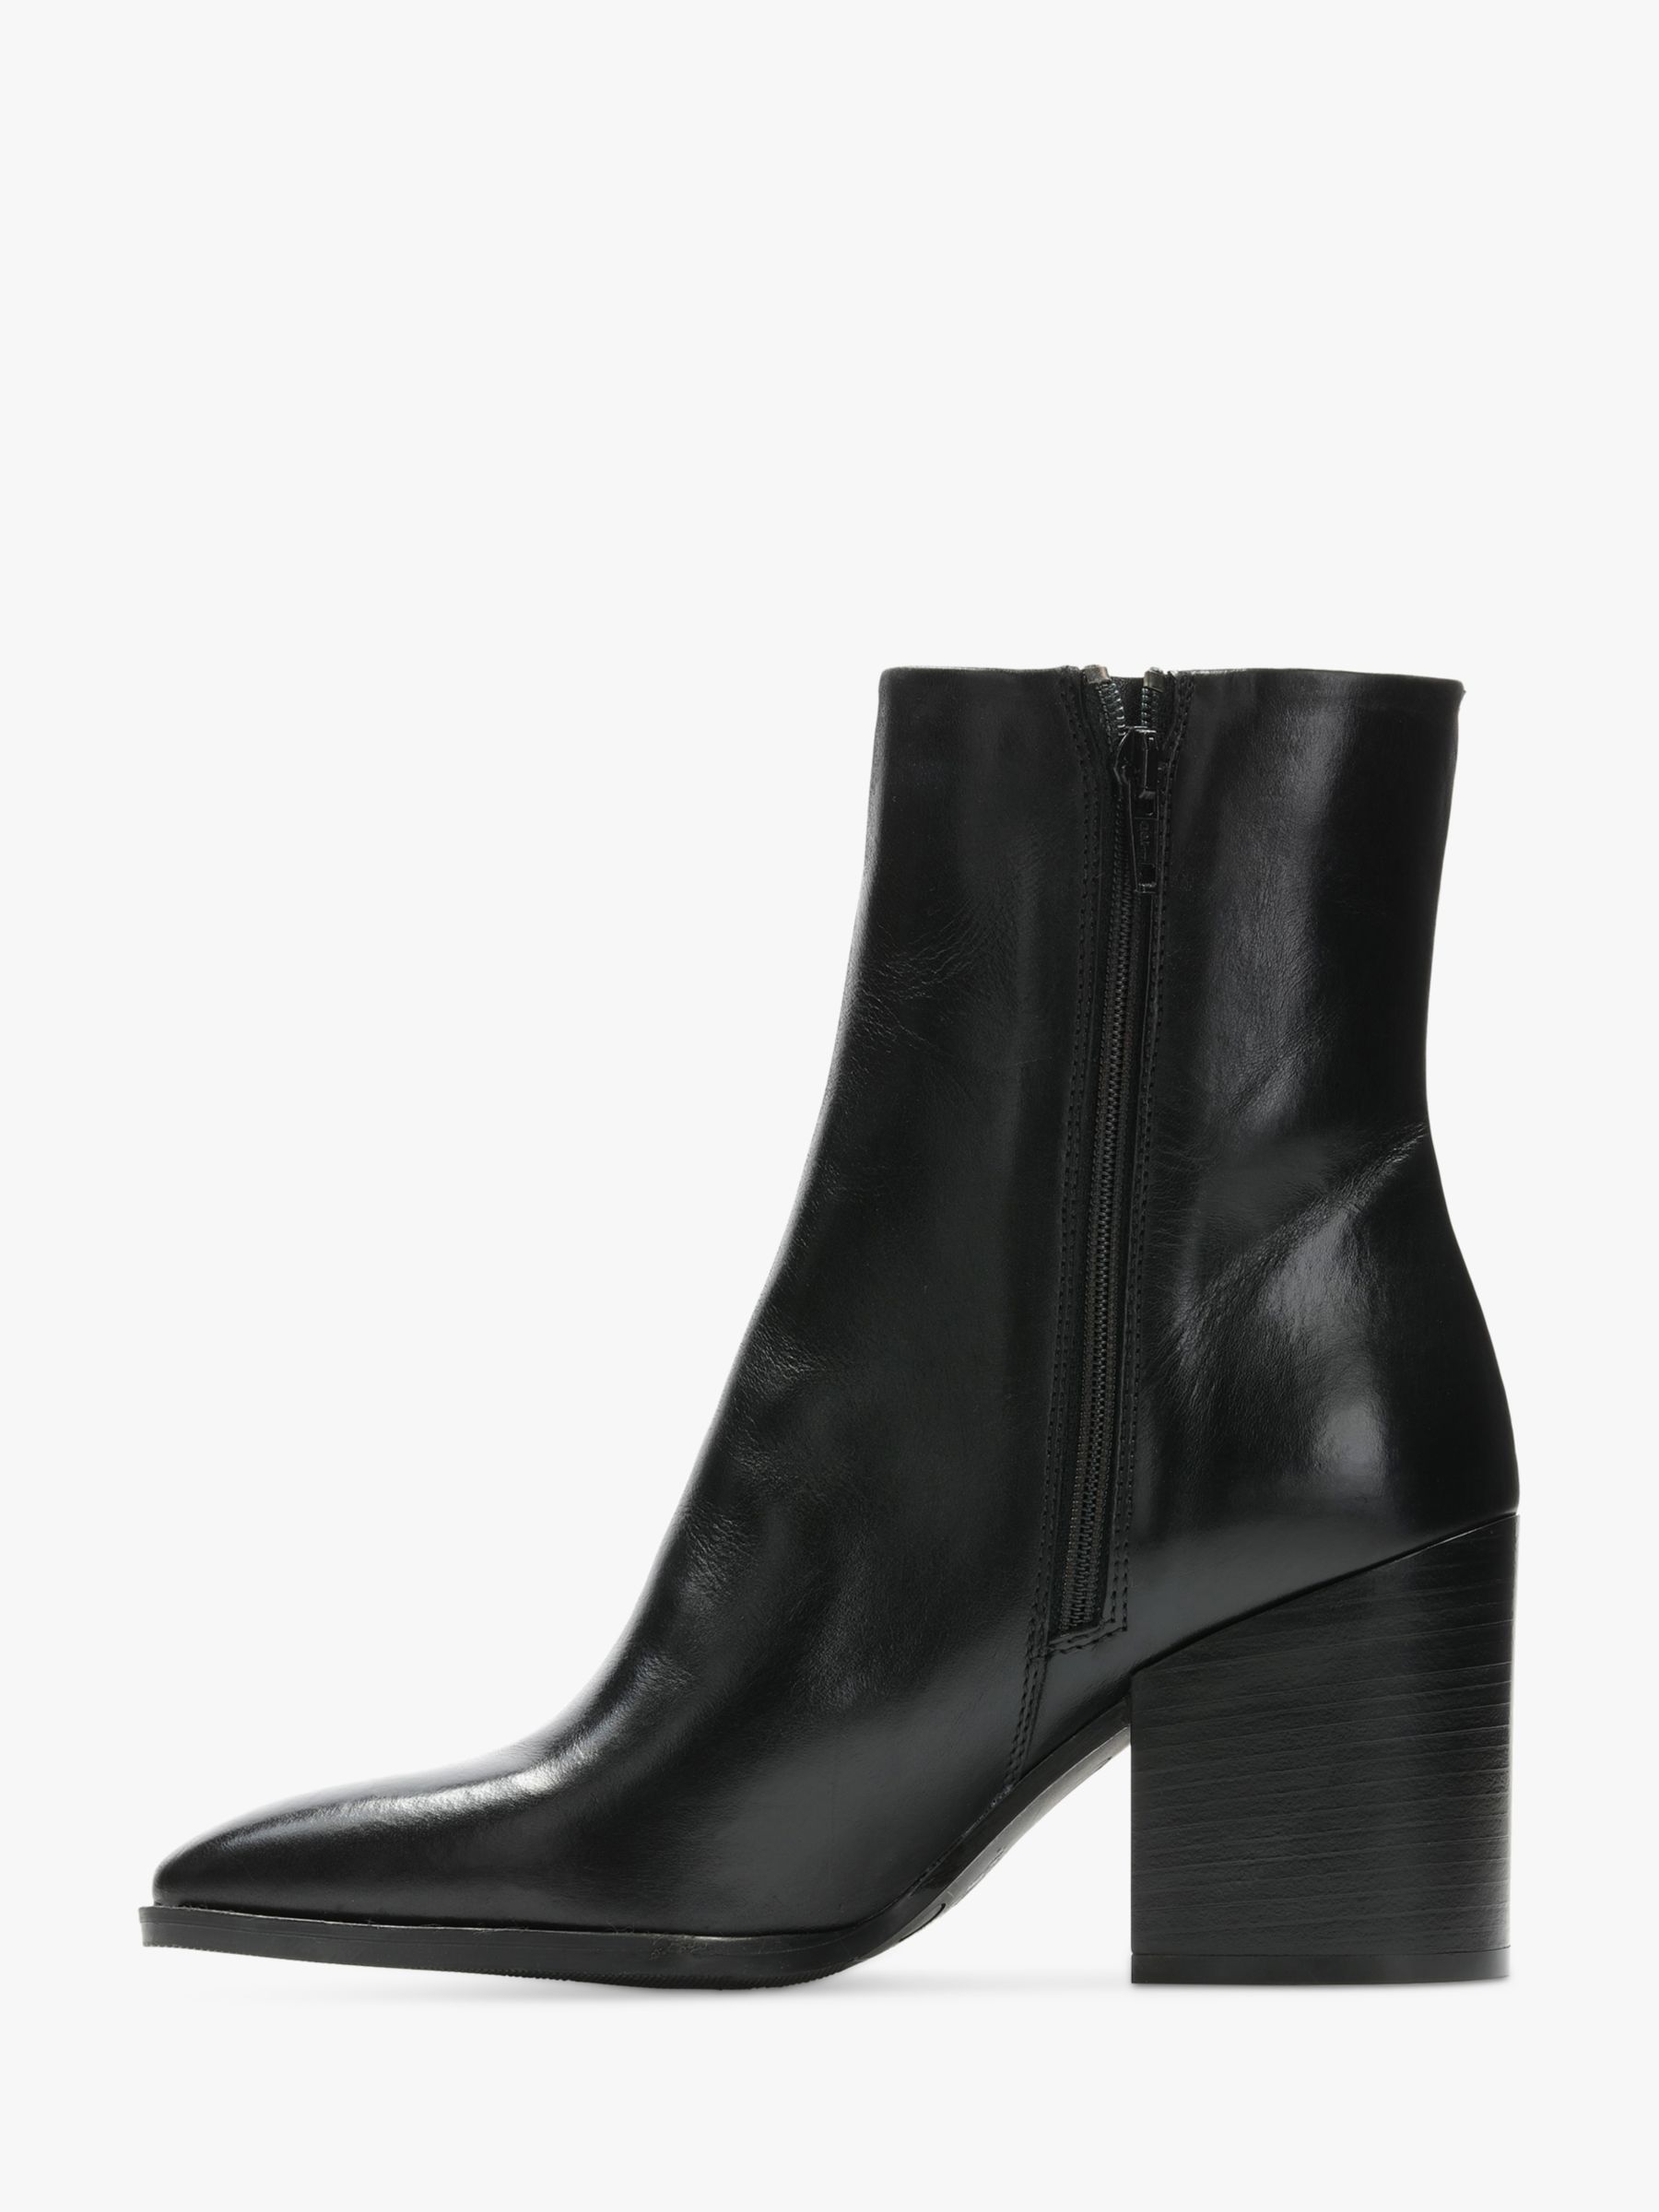 Clarks Lydia Mid Leather Stacked Heel Ankle Boots, Black at John Lewis ...